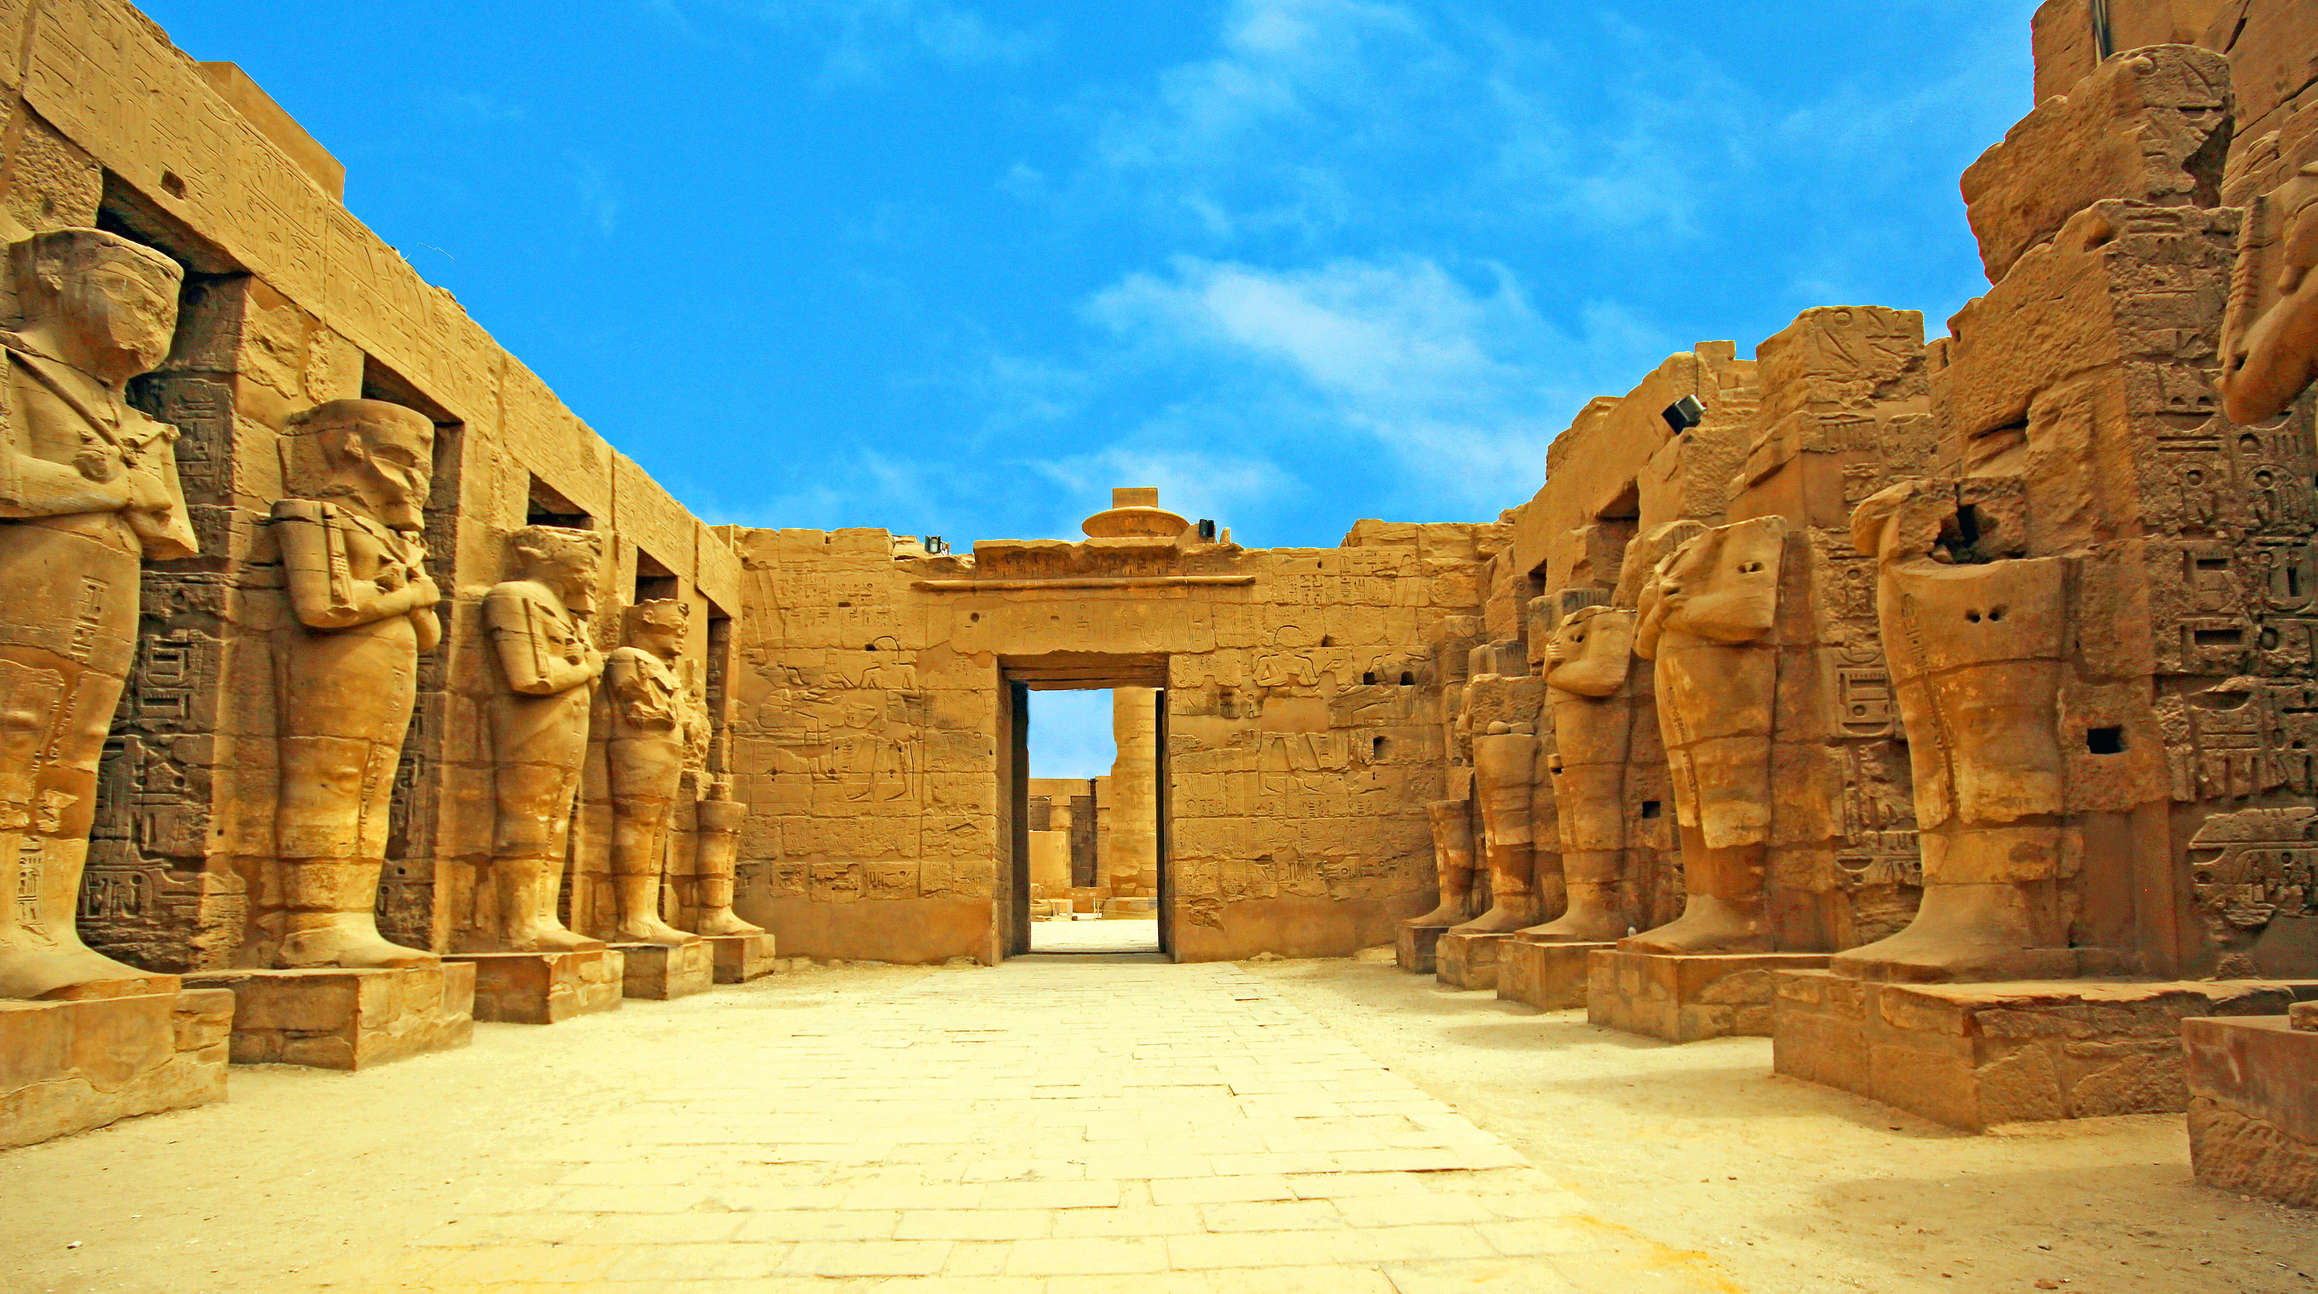 Take a virtual tour of Egypt’s finest attractions